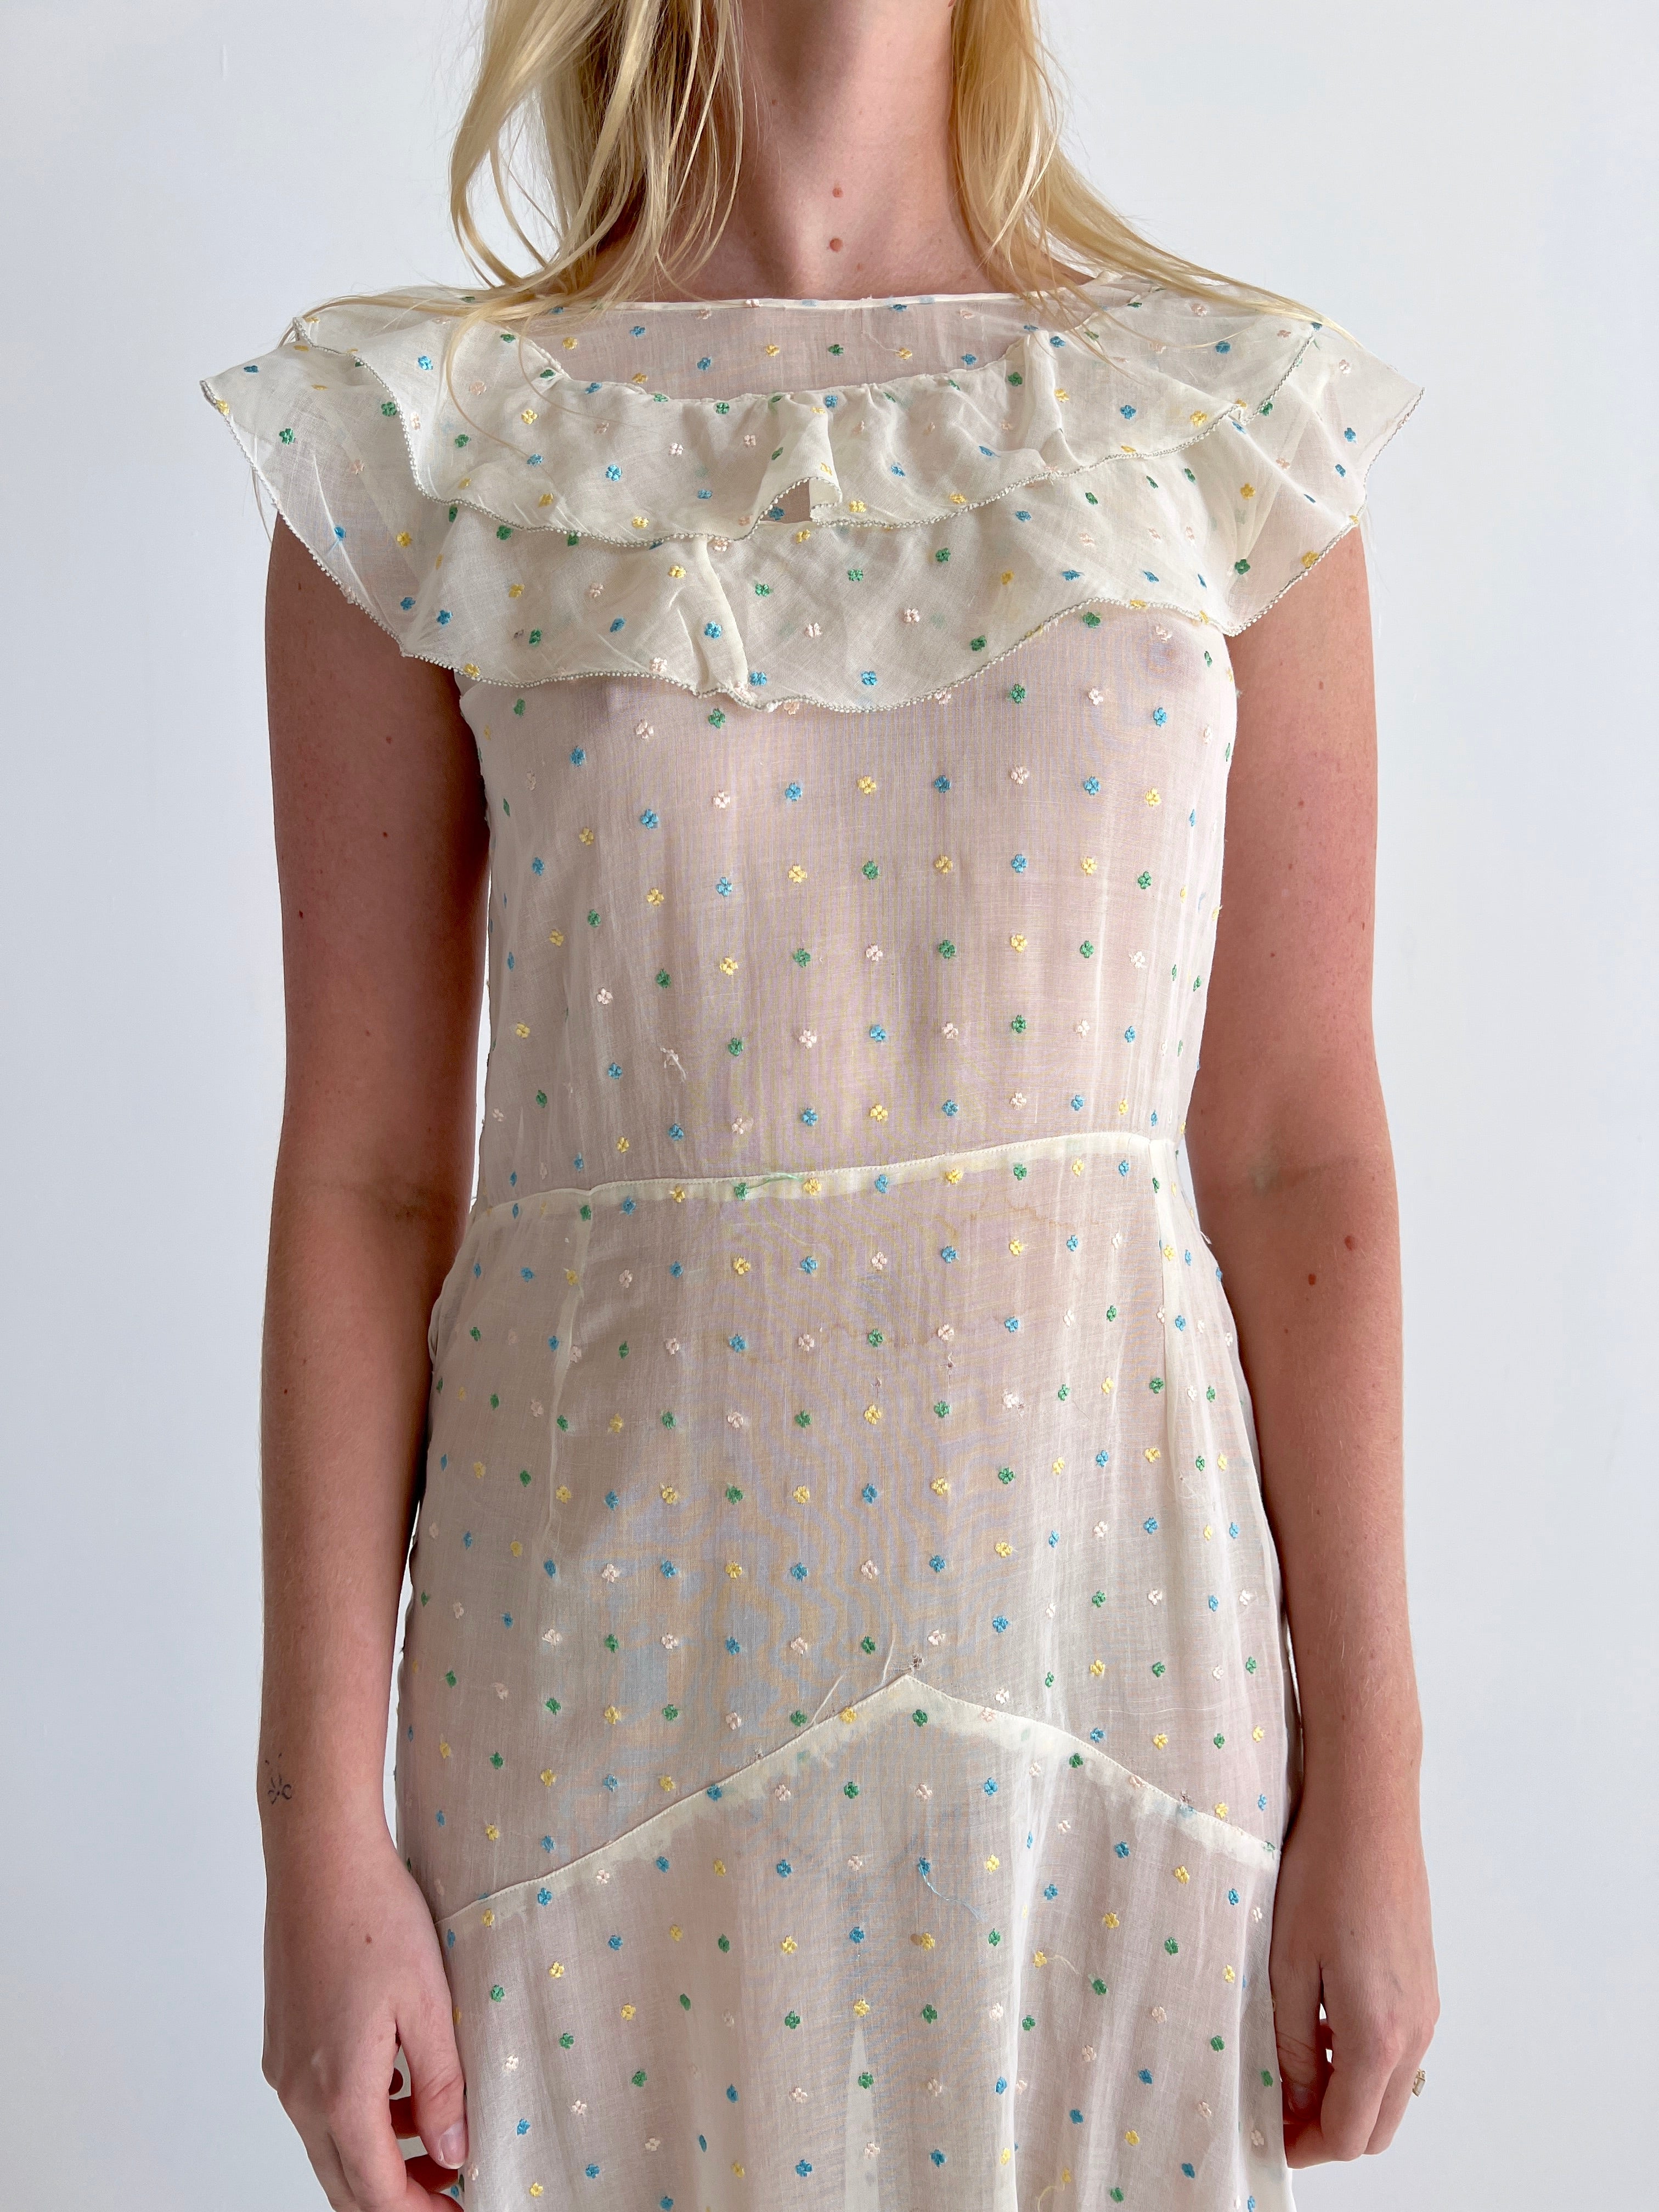 1930's Floral Embroidered Organza Dress